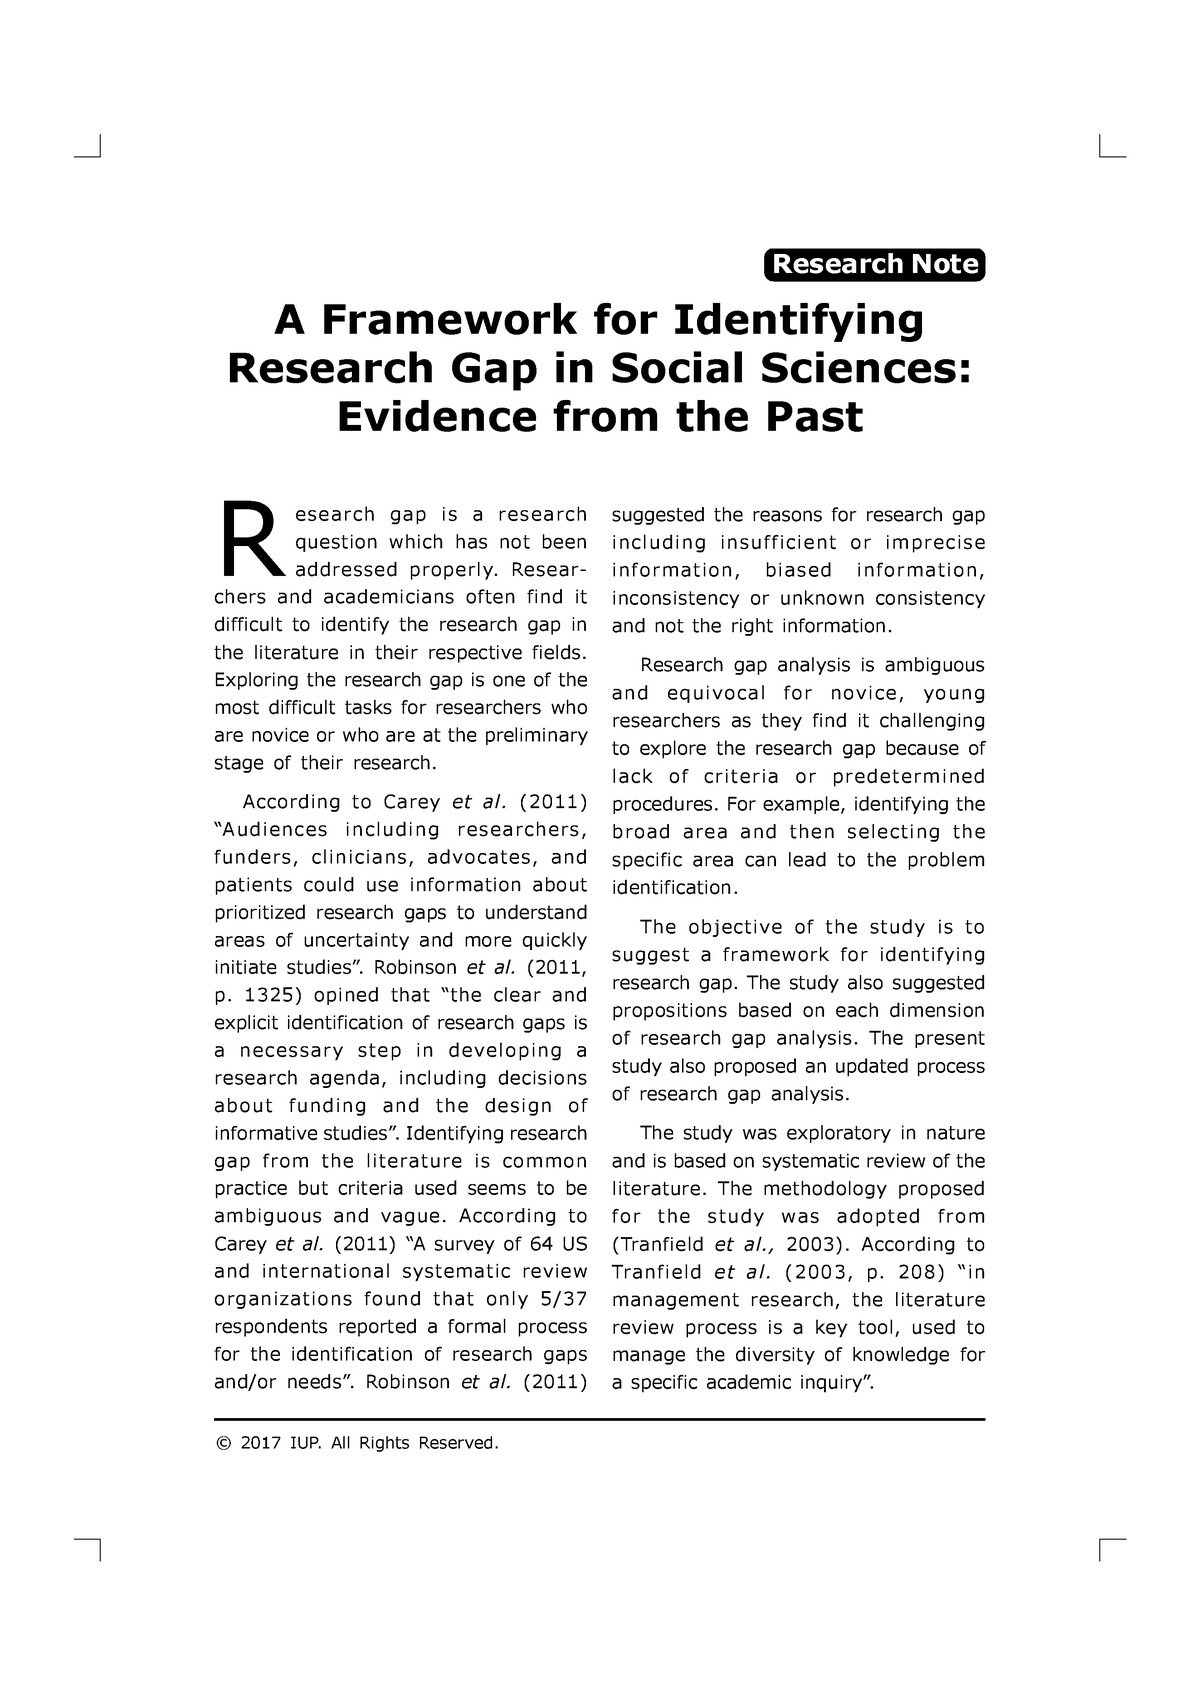 a-framework-for-identifying-research-gap-66-2017-iup-all-rights